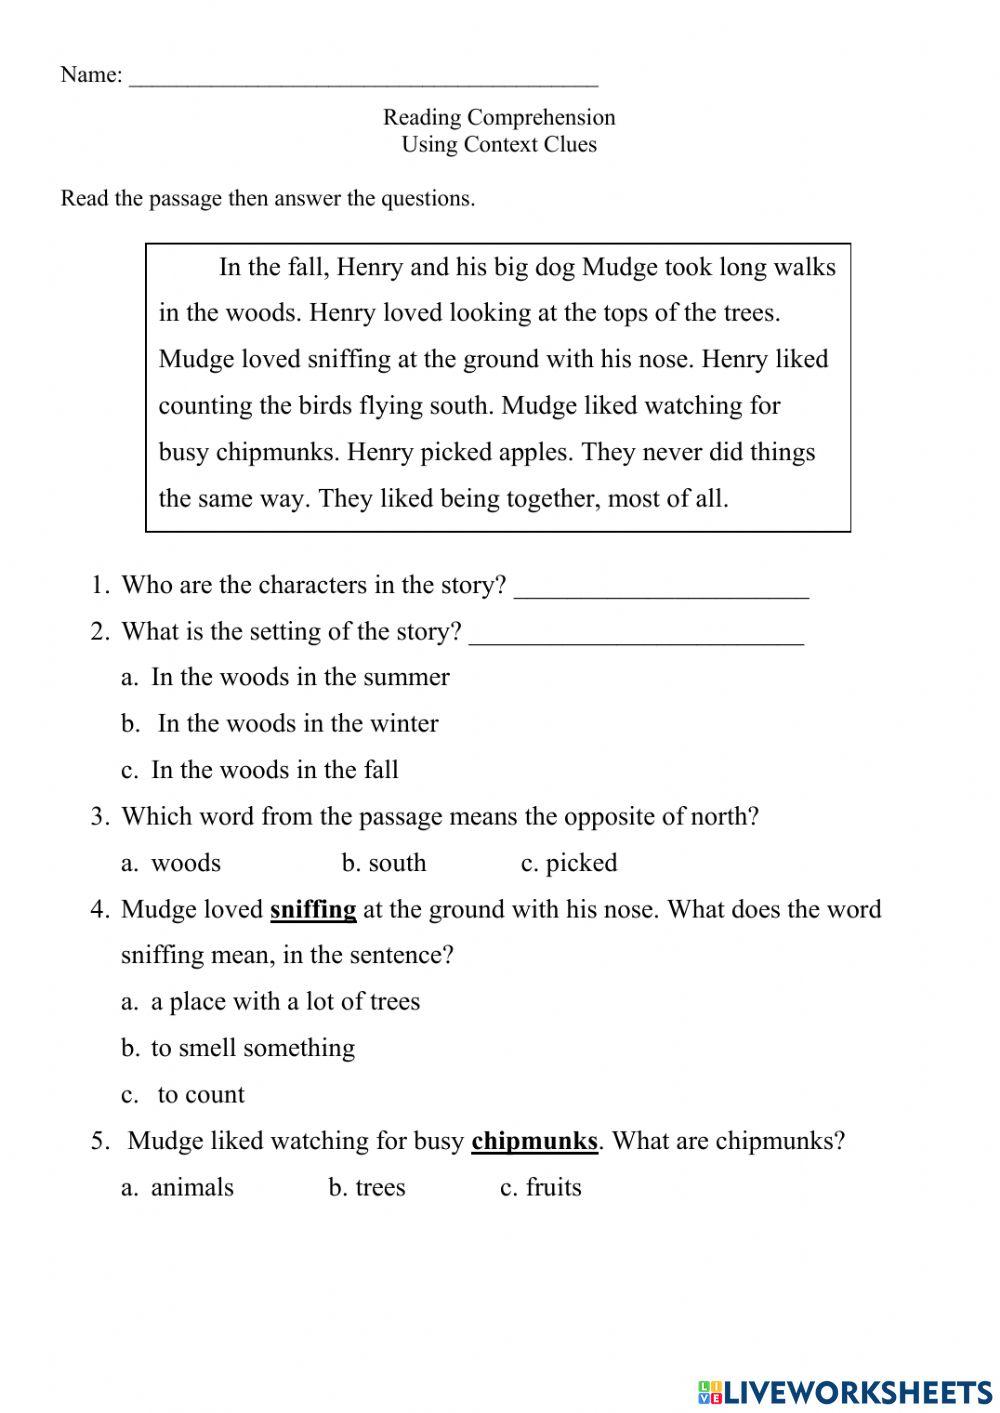 Henry and Mudge Comprehension